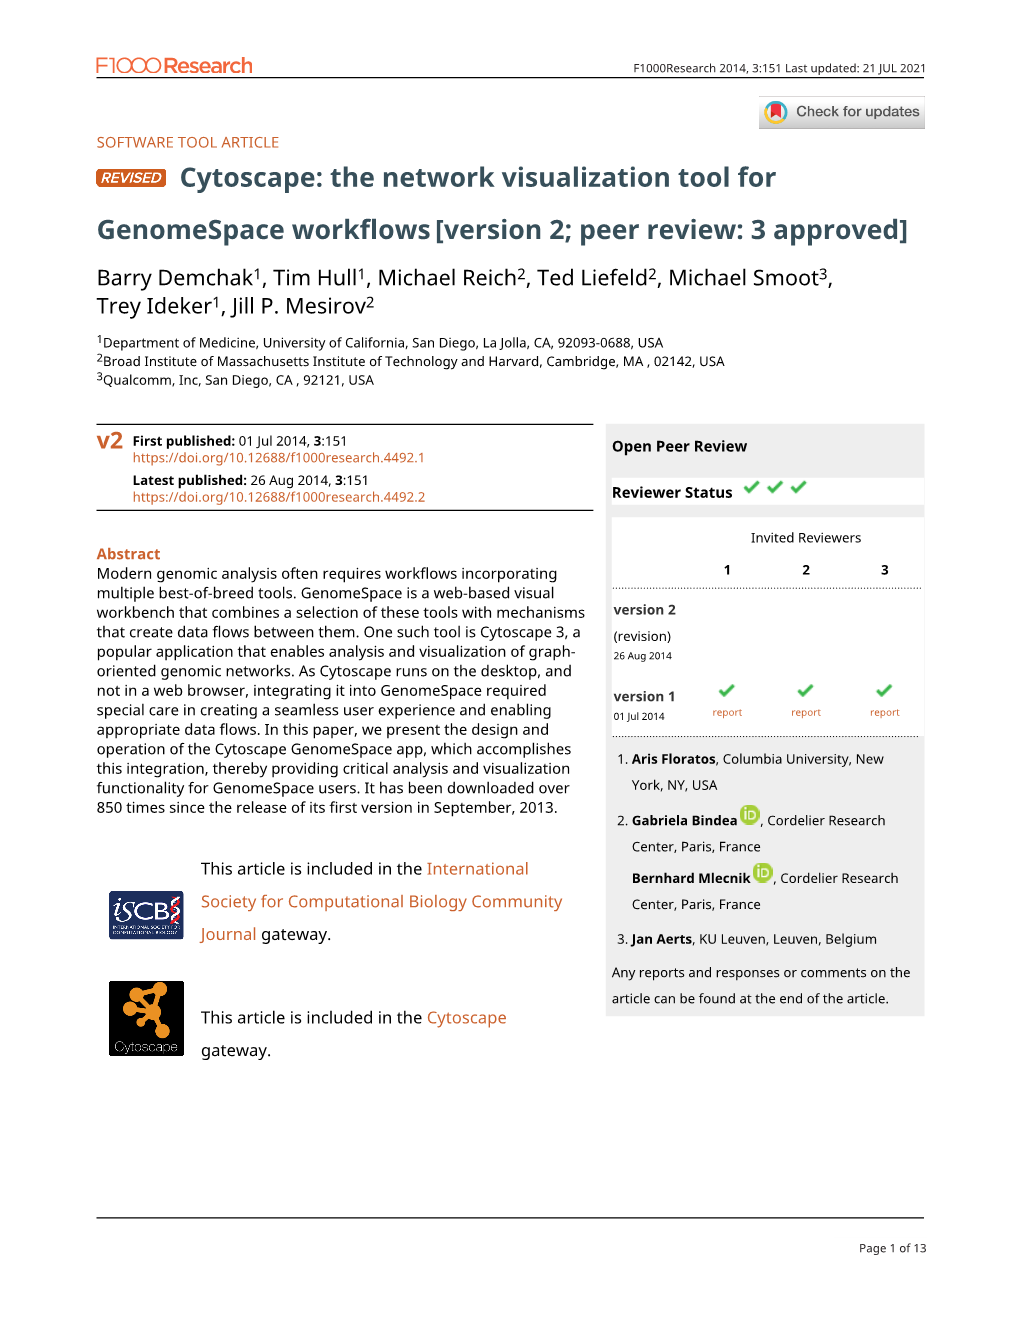 Cytoscape: the Network Visualization Tool for Genomespace Workflows